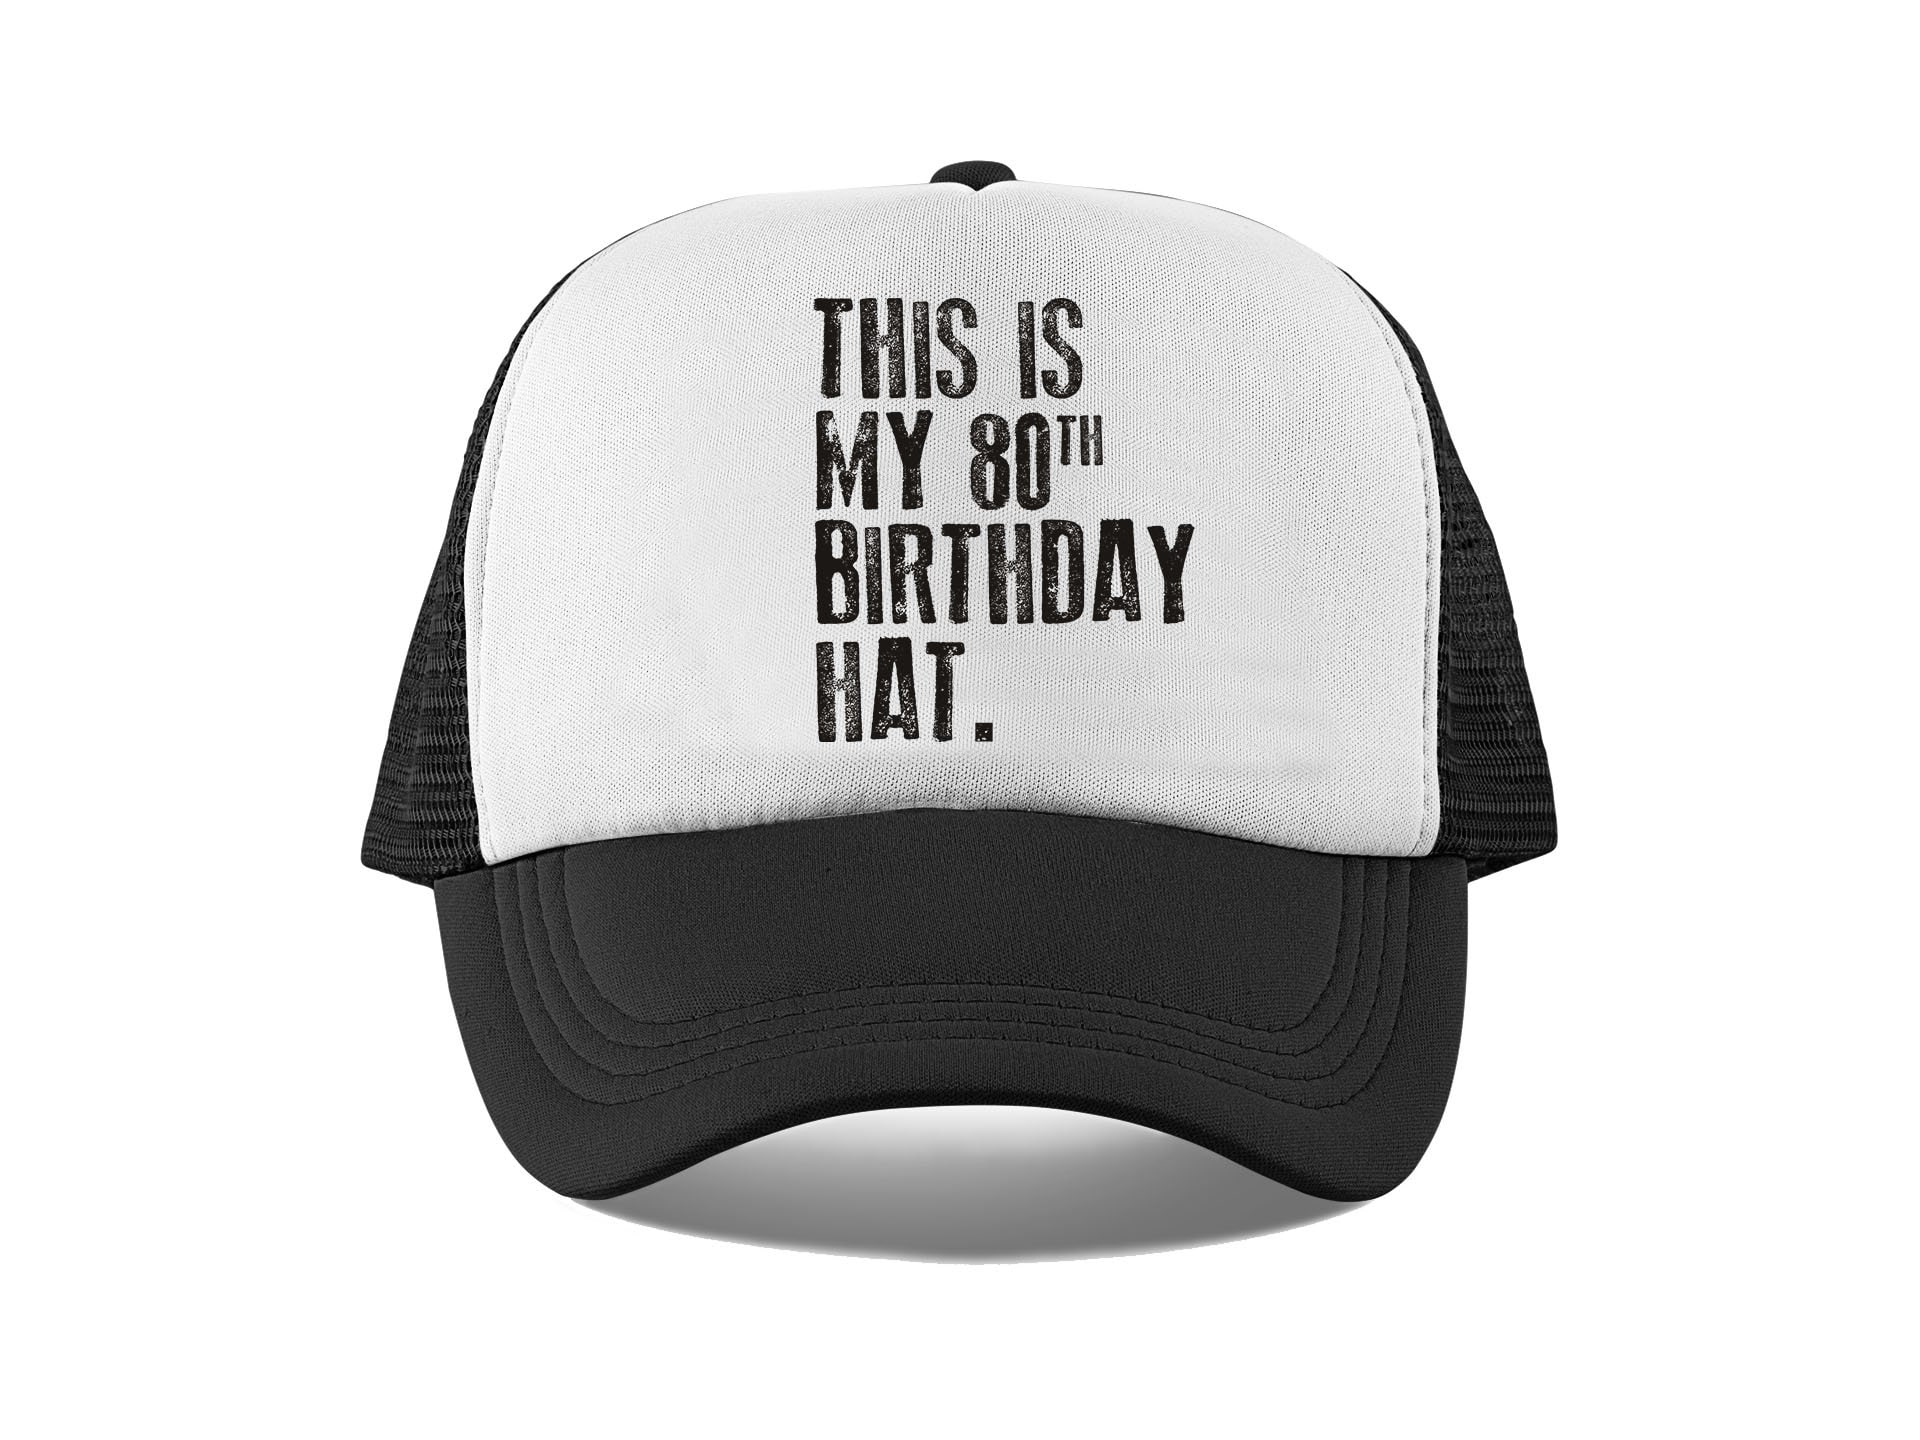 This is Him Trucker Years - Retro, Birthday or Vintage , Hat, 80th Her, My Mesh for Hat Birthday Hat, Old Birthday Hat 80th 80 Etsy Birthday Hat